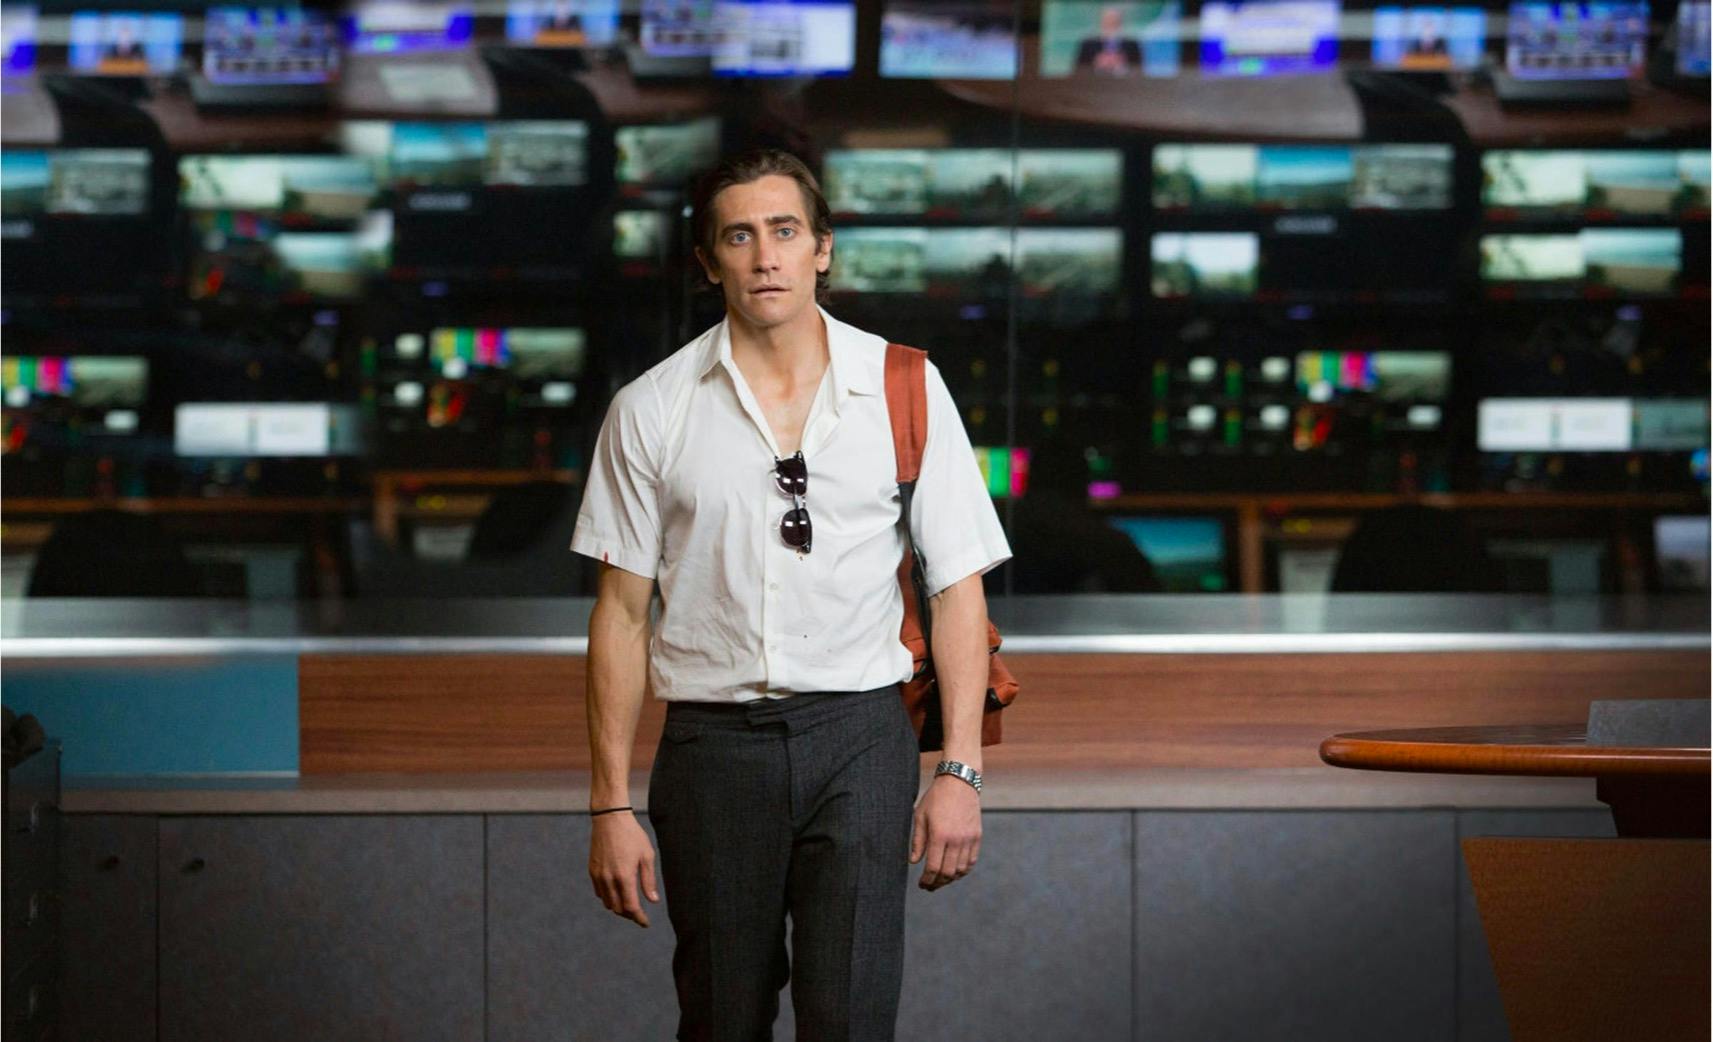 Louis Bloom (Jake Gyllenhaal) in Nightcrawler (2014) wears a white shirt, dark pants, and an orange backpack. There are many screens in the background.